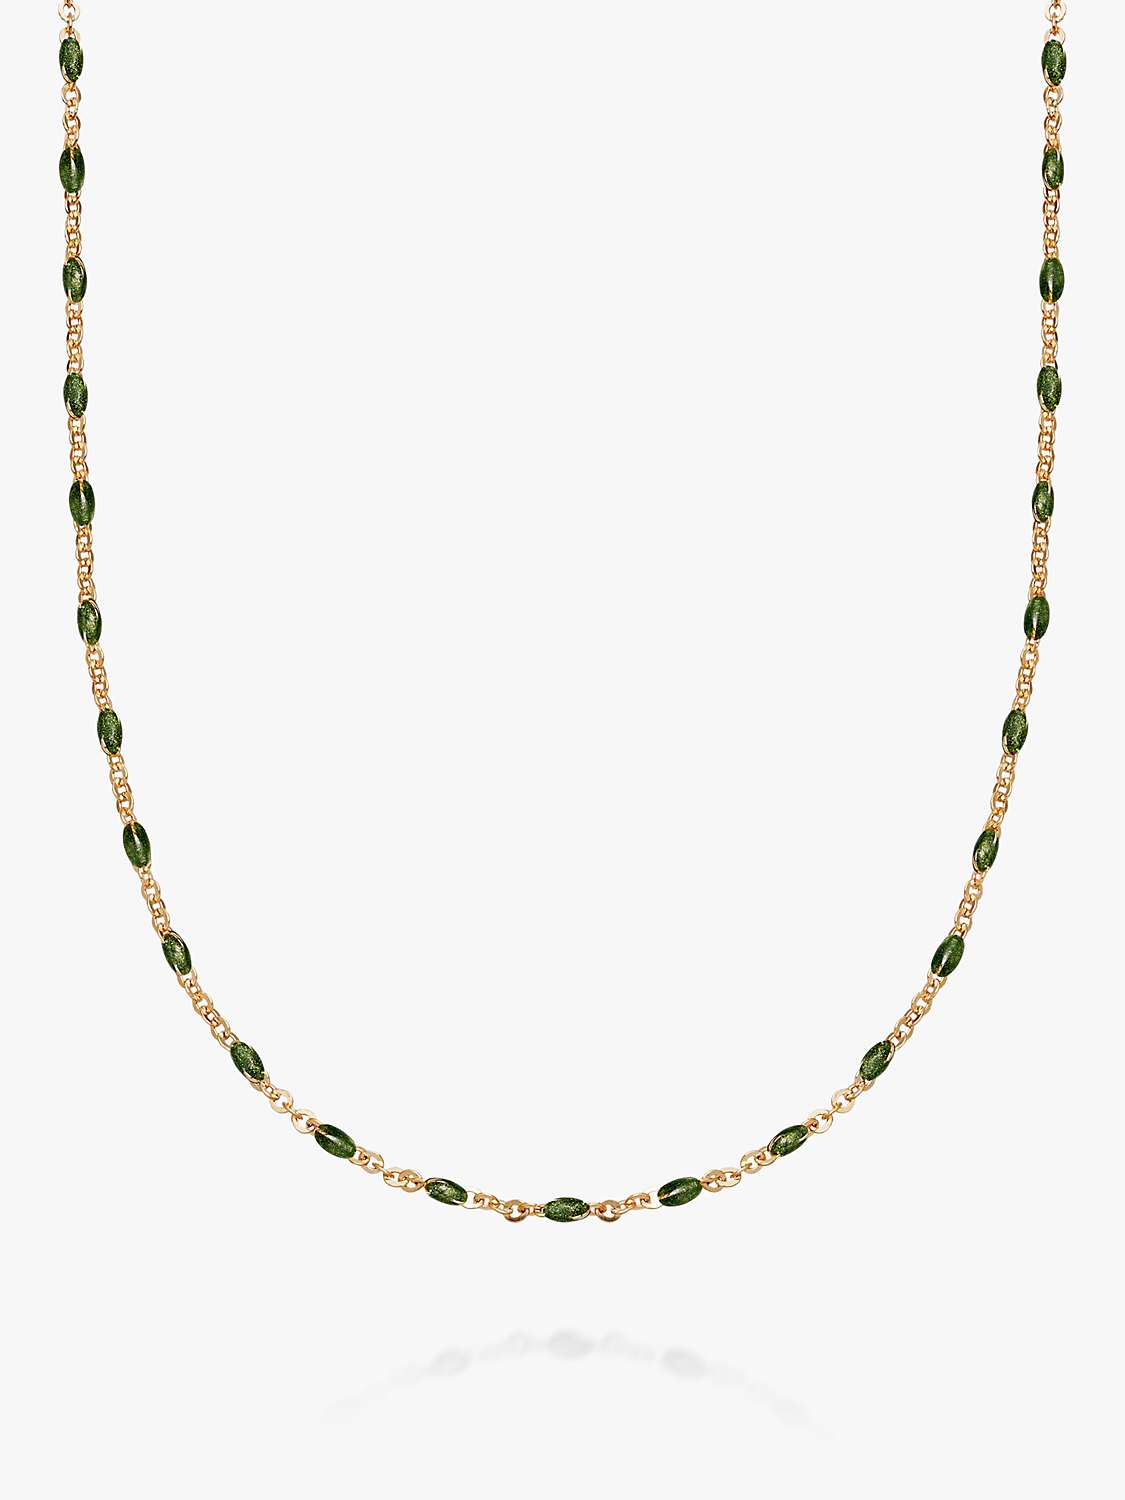 Buy Daisy London Enamel Bead Chain Necklace Online at johnlewis.com